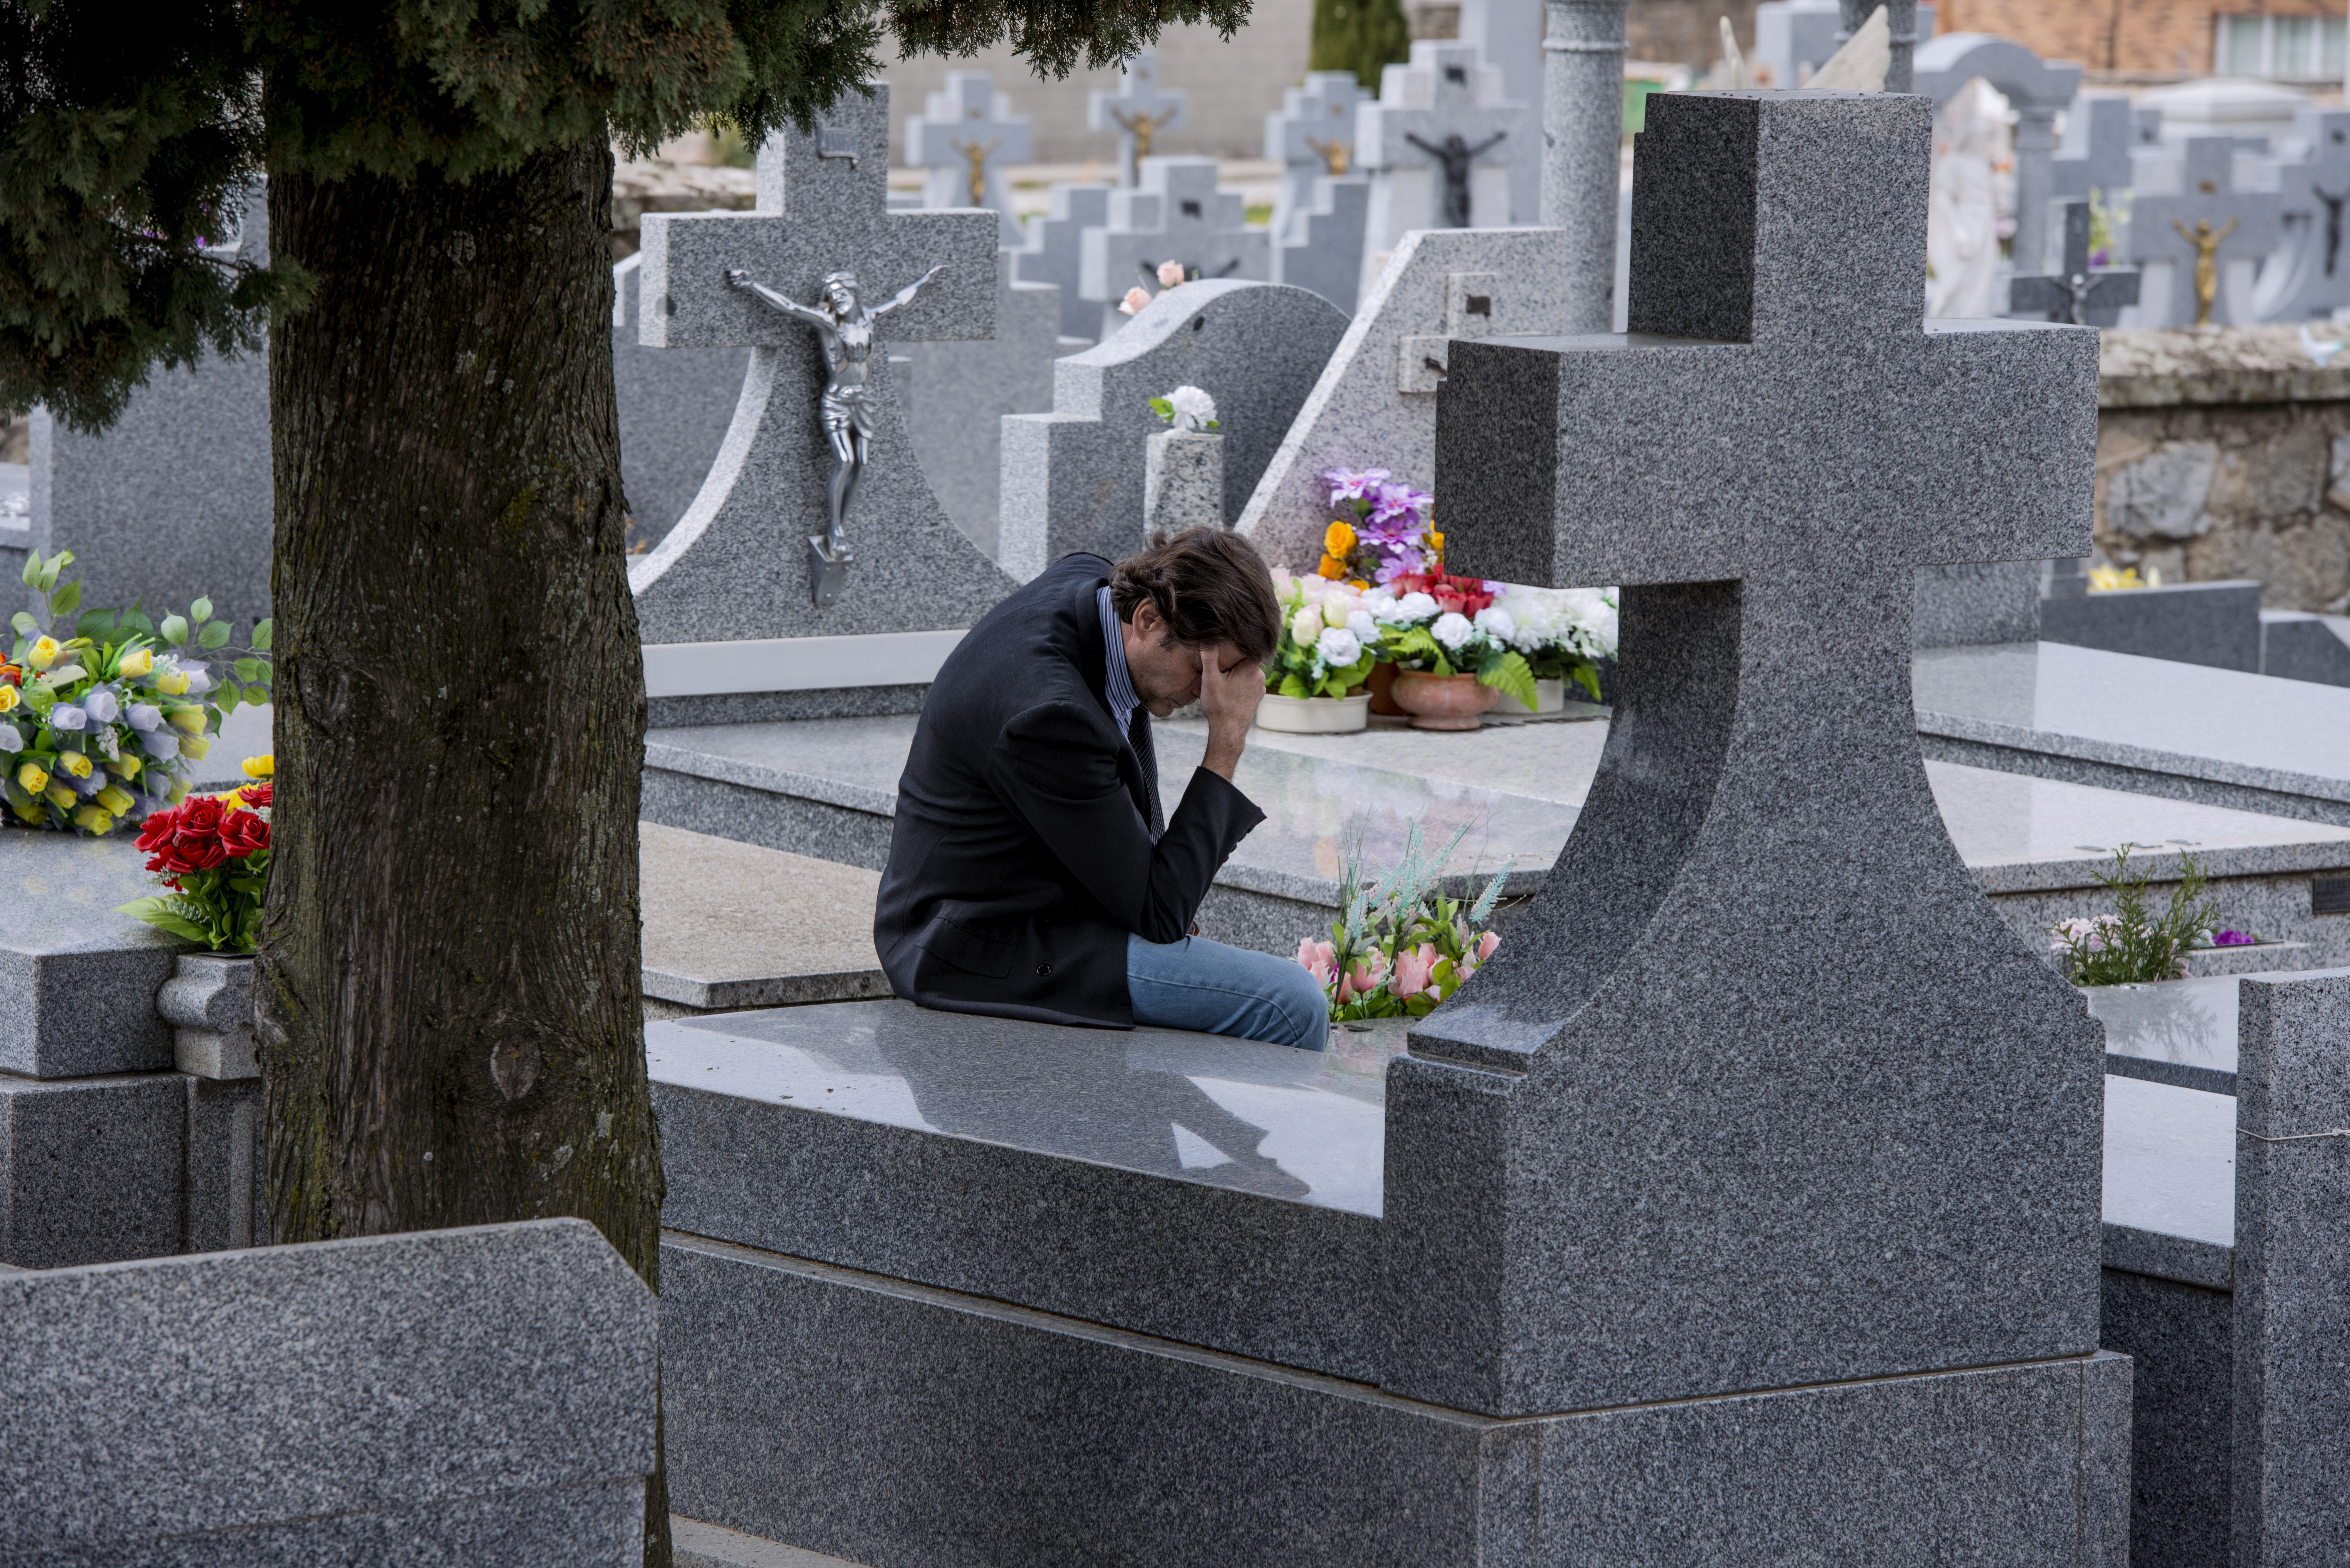 A devastated man sitting in a cemetery | Source: Shutterstock